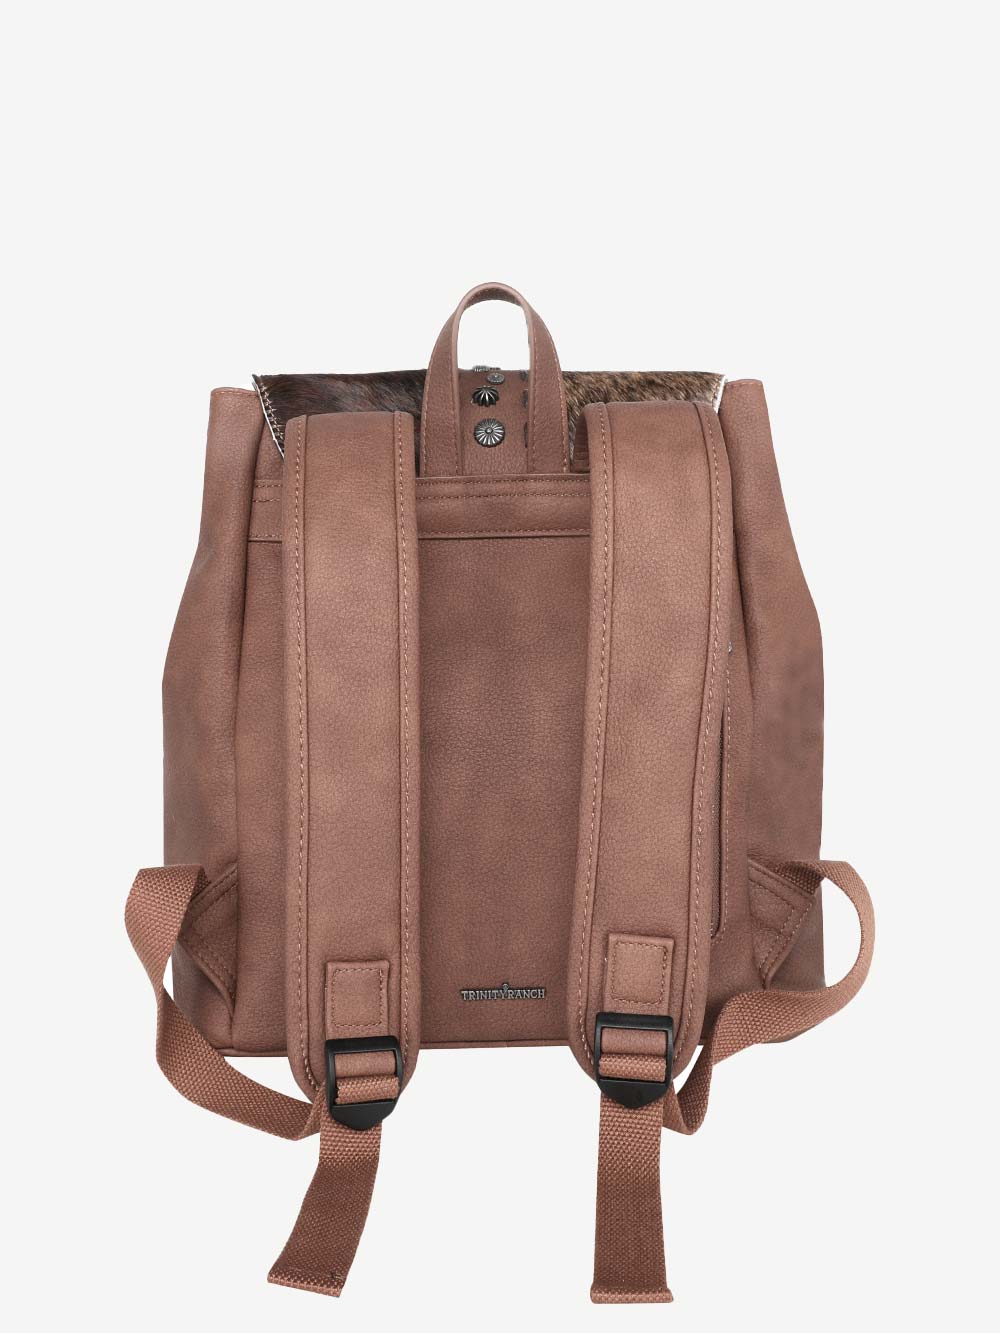 Trinity Ranch Hair-On Cowhide Collection Backpack - Montana West World